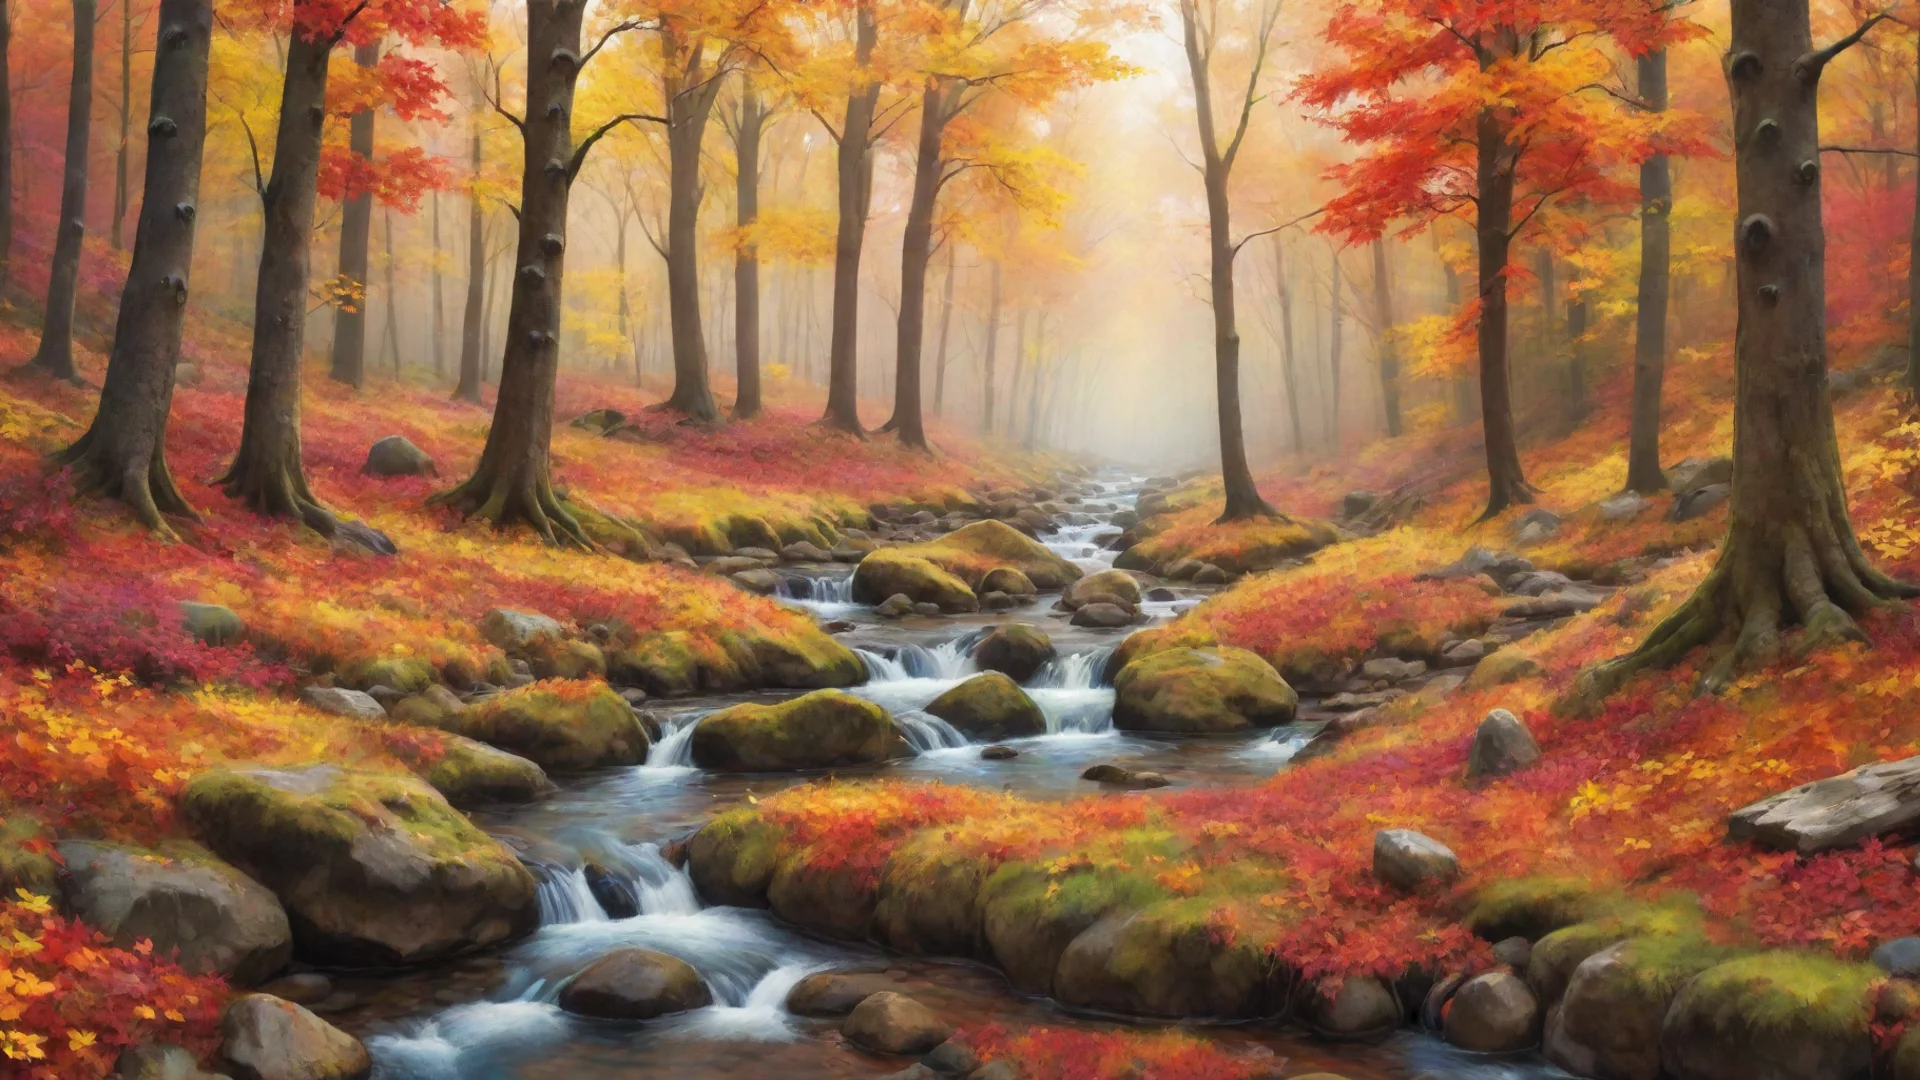 amazing vibrantly colorful cozy autumn forest with a stream art wallpaper awesome portrait 2 wide